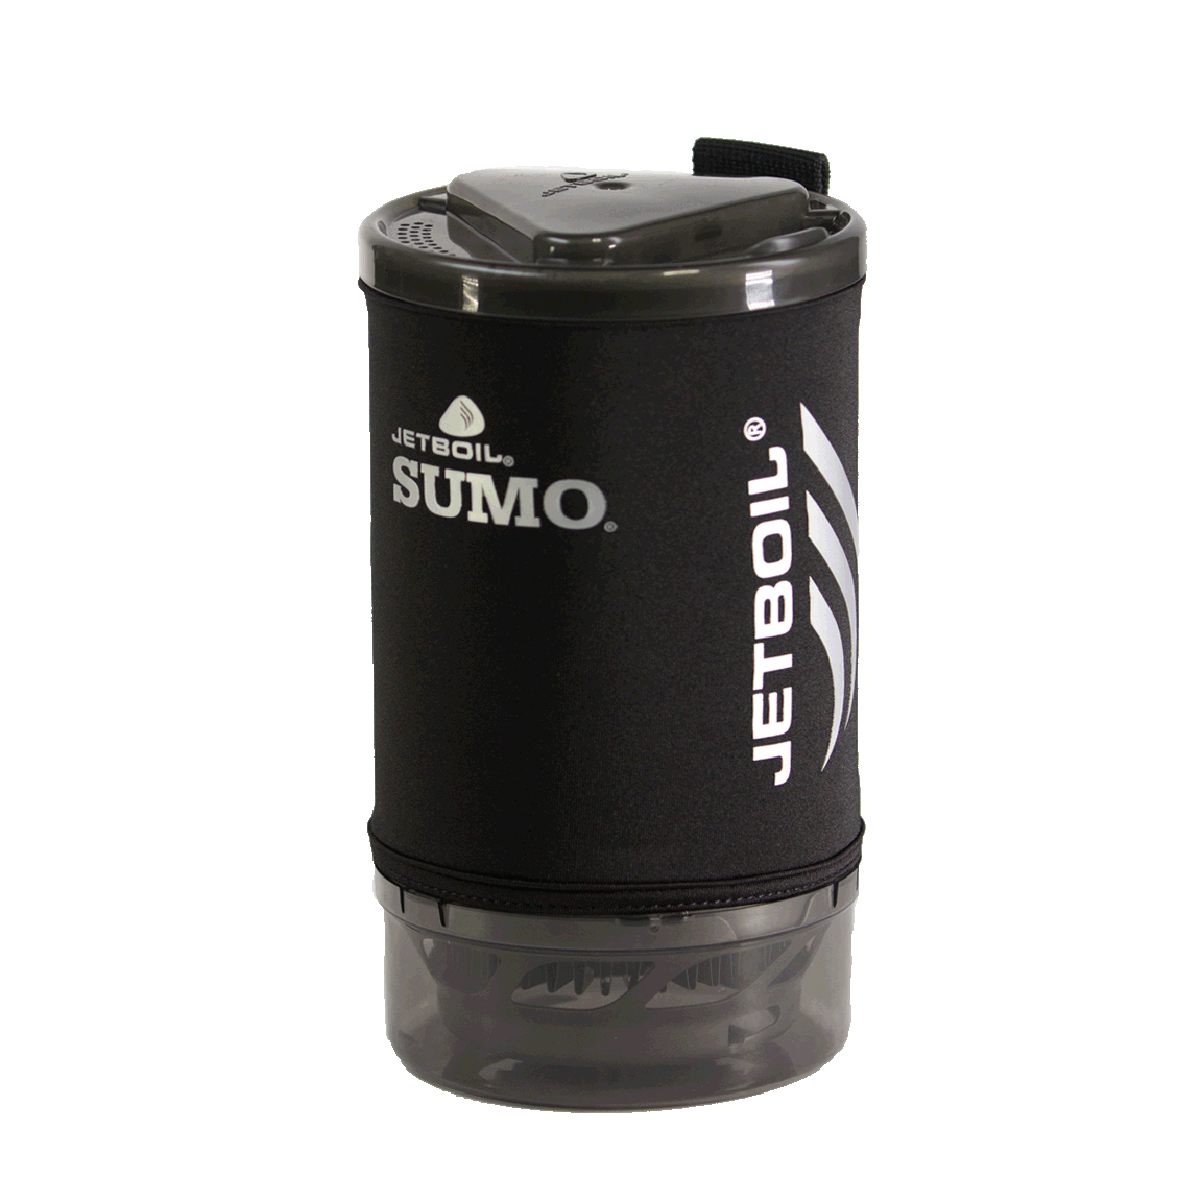 Jetboil Sumo - Overland Outfitters - Vancouver, BC